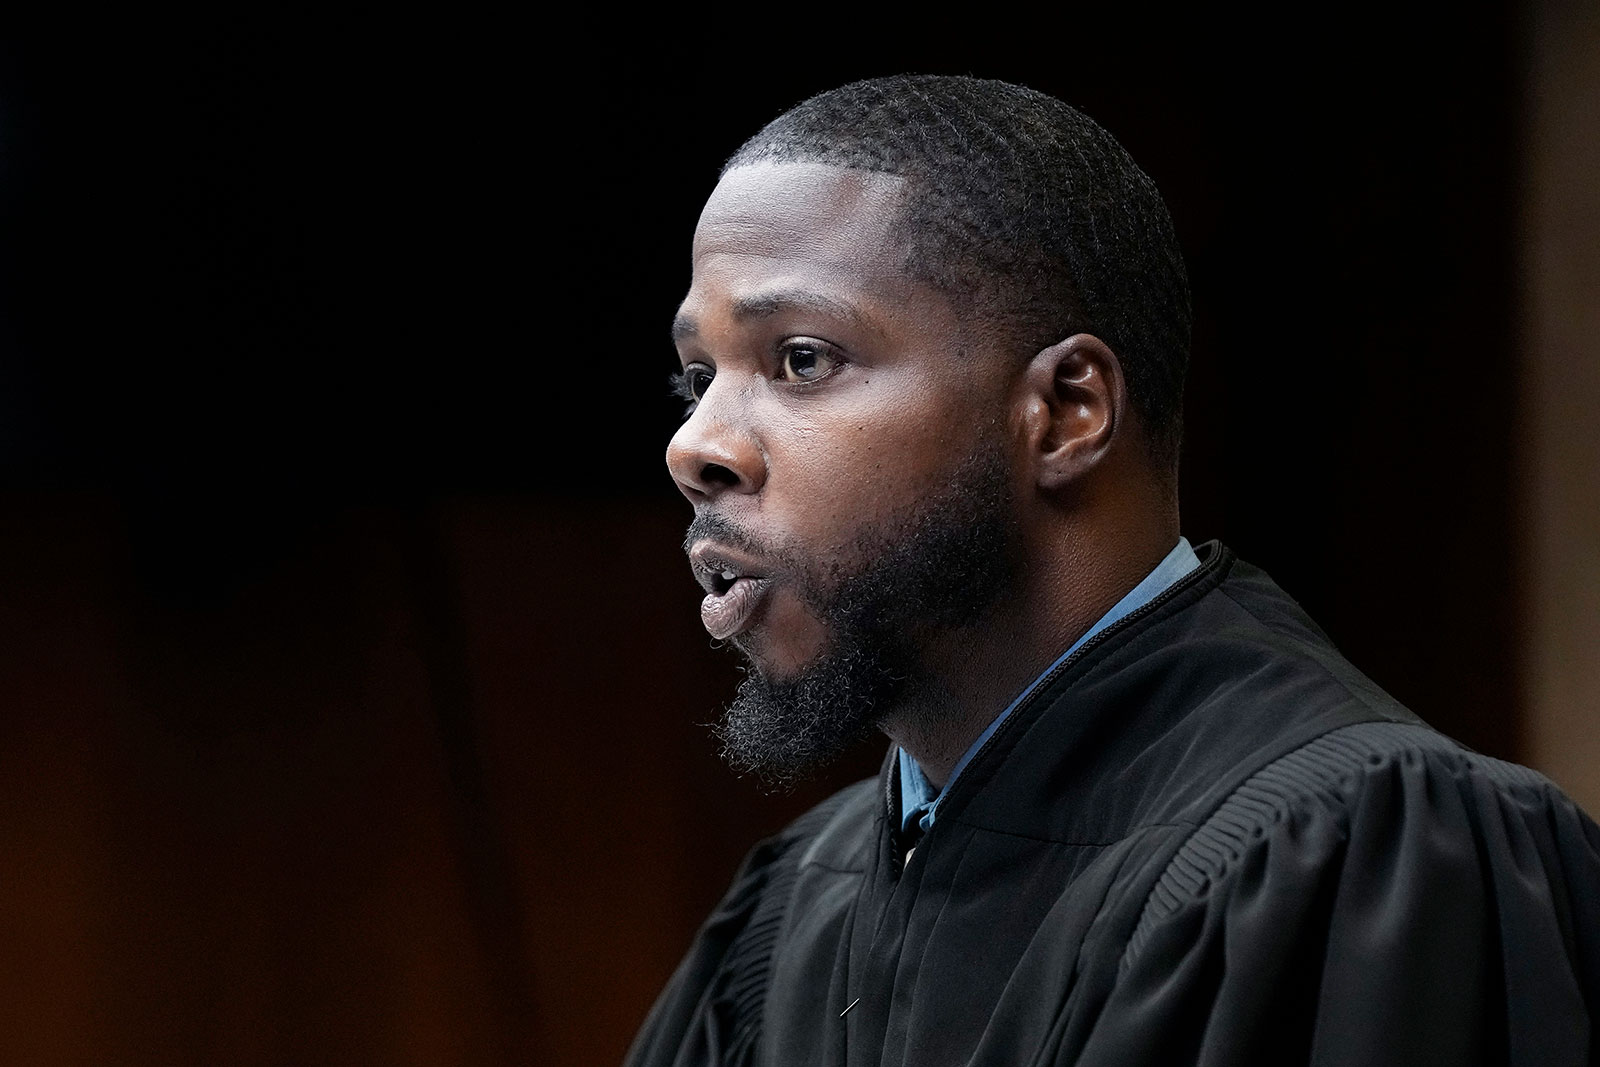 Judge Kwamé Rowe presides over the sentencing hearing of Ethan Crumbley on Friday in Pontiac, Michigan. 